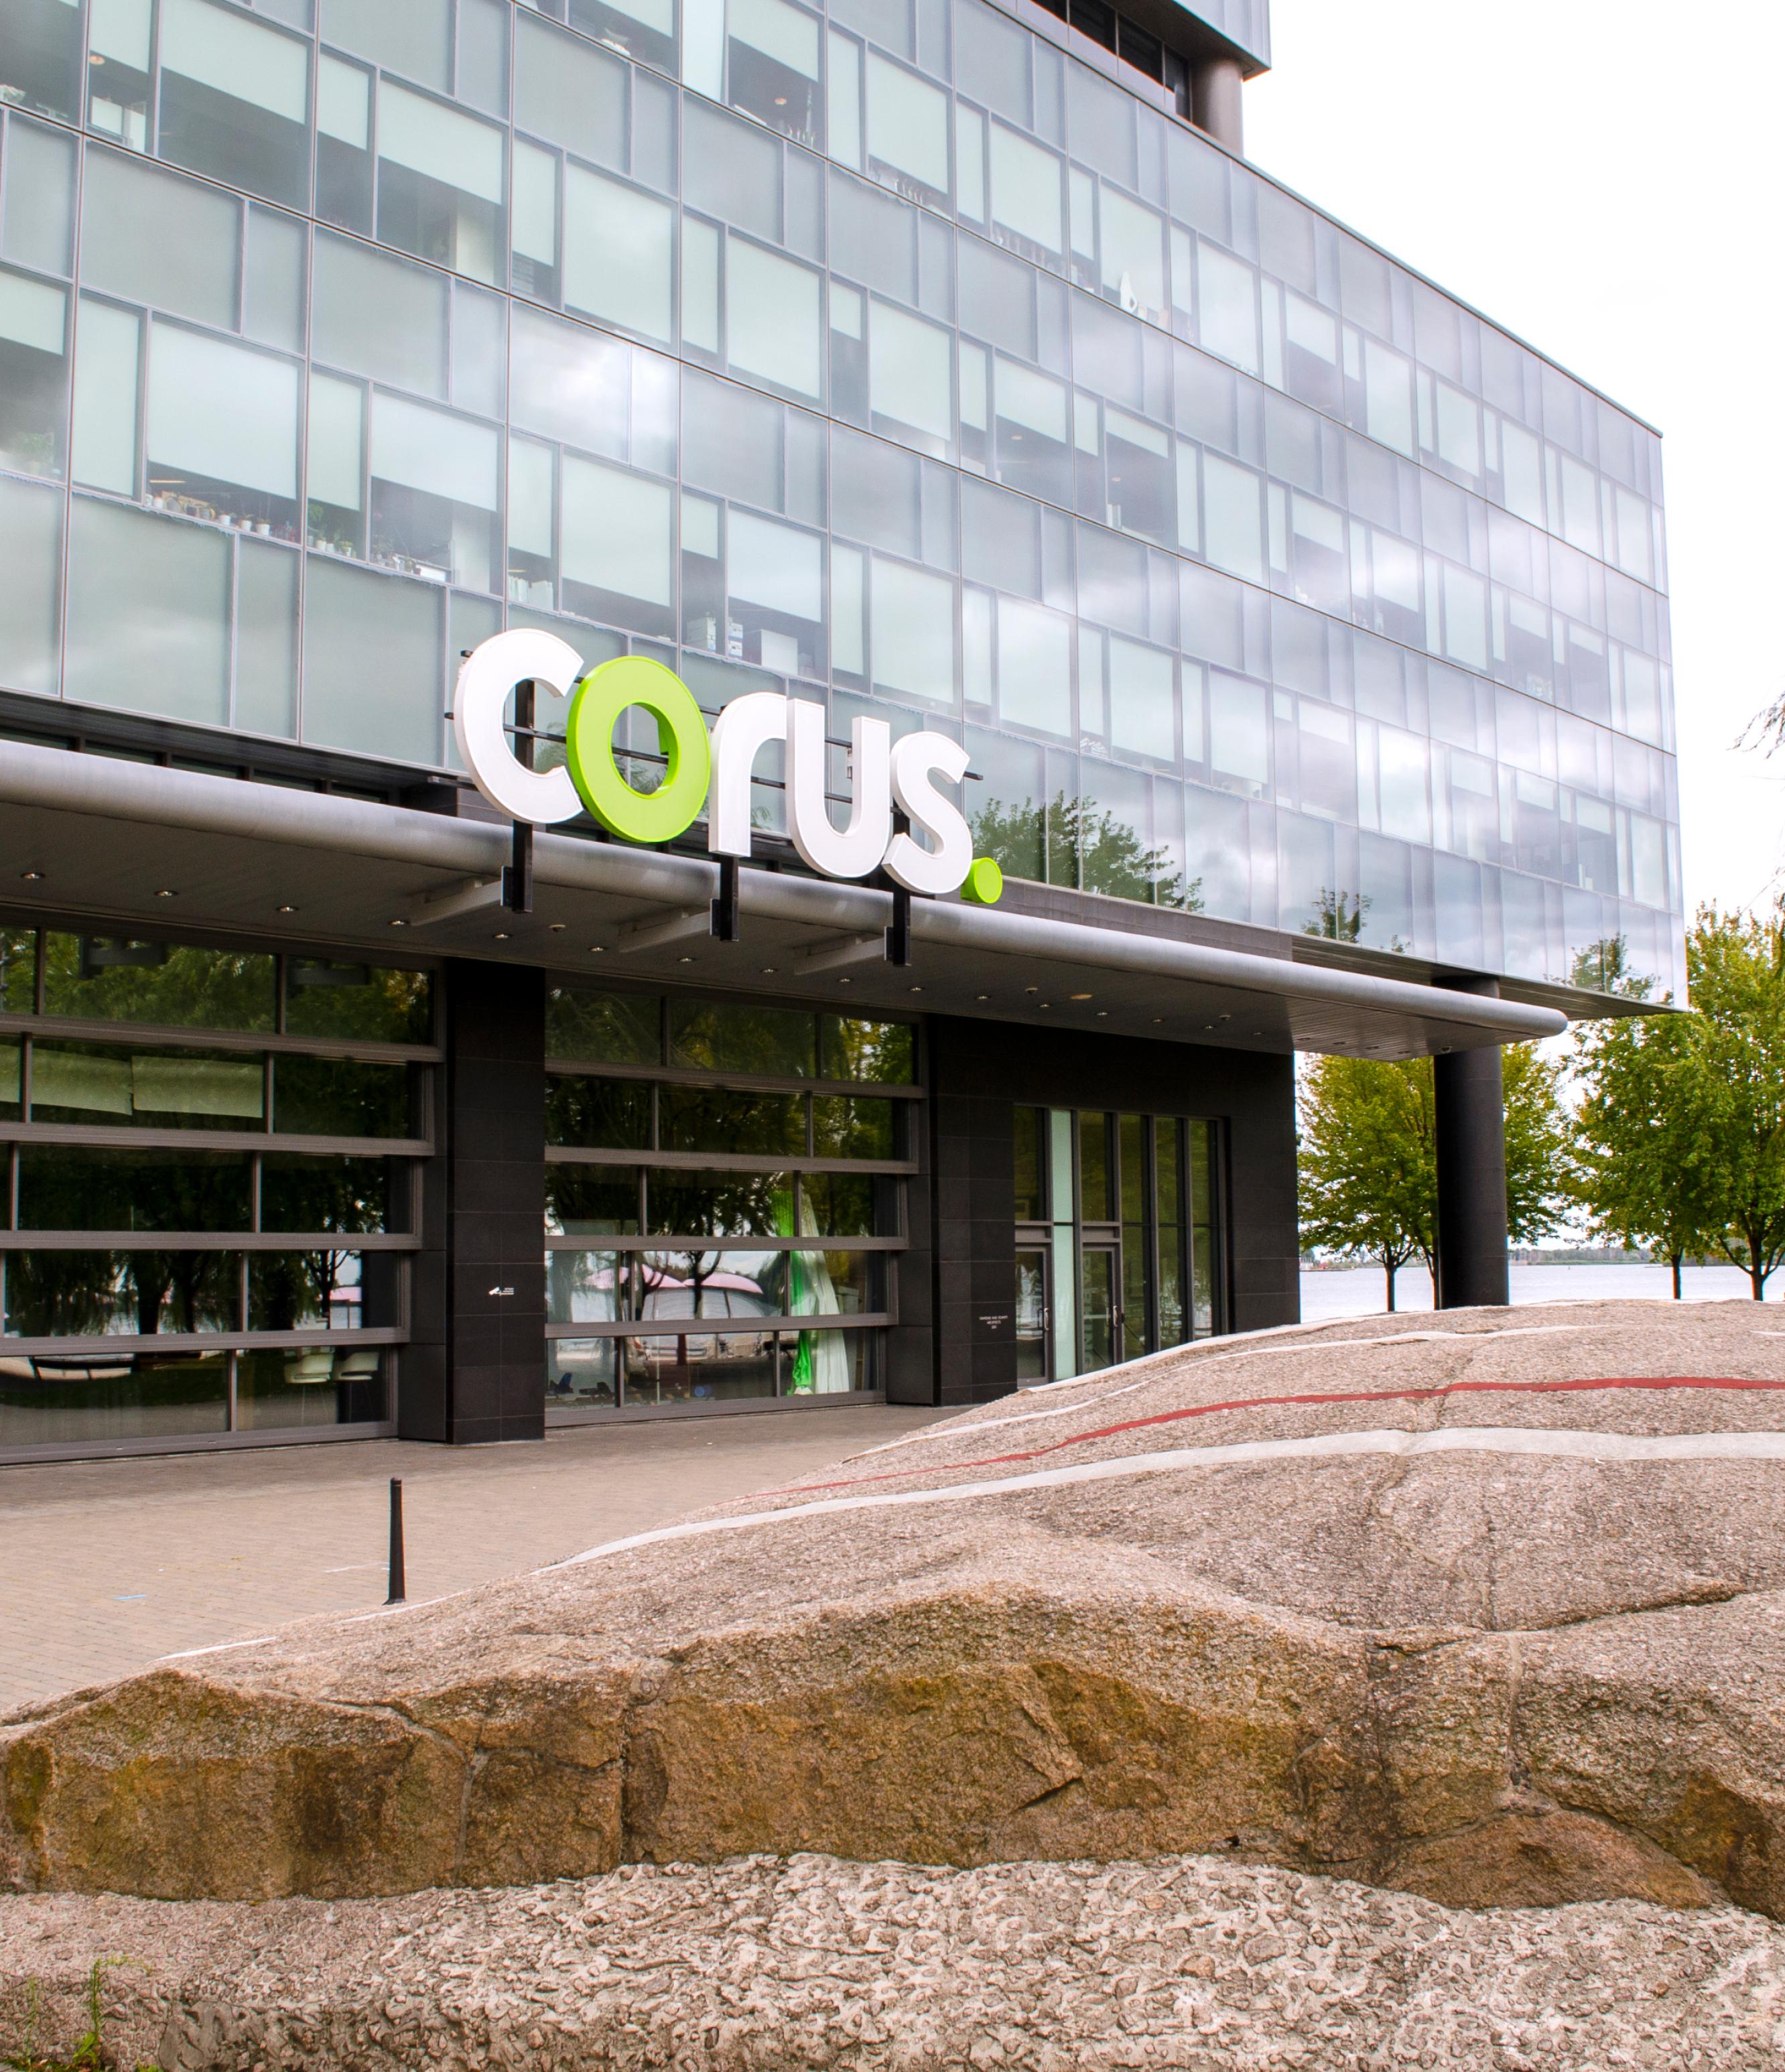 Photo of the outside of the Corus building which showcases the Corus logo.